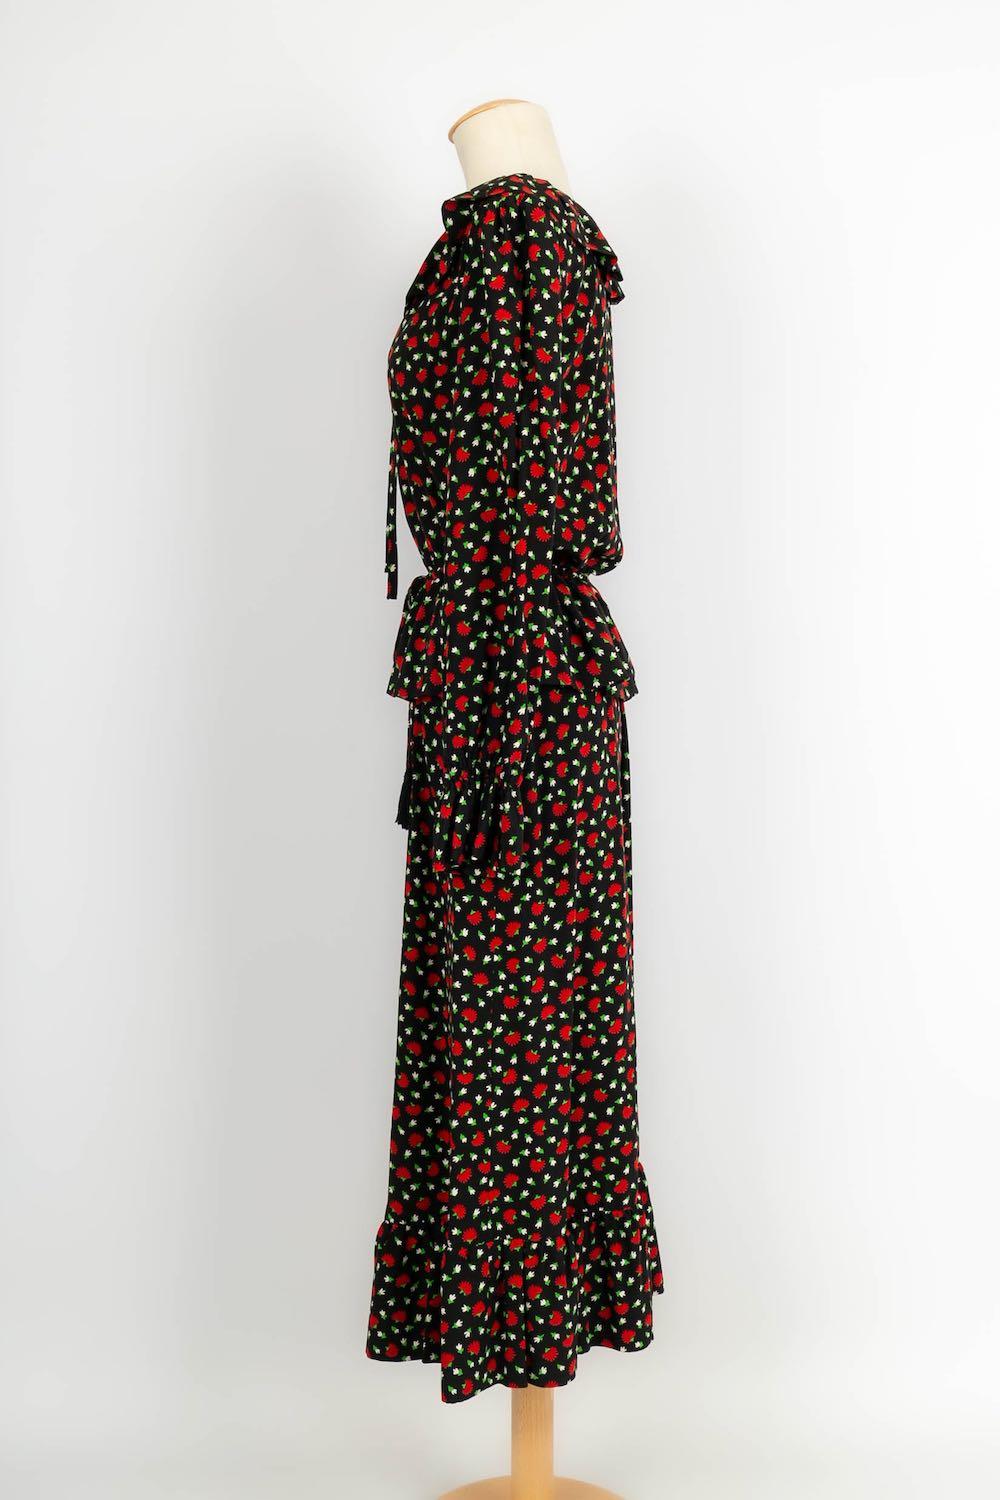 Yves Saint Laurent -(Made in France) Haute Couture set consisting of a black silk blouse and skirt printed with red flowers. No size label or composition, it fits a 36FR/38FR.

Additional information: 
Dimensions: Blouse: Shoulder width: 42 cm,